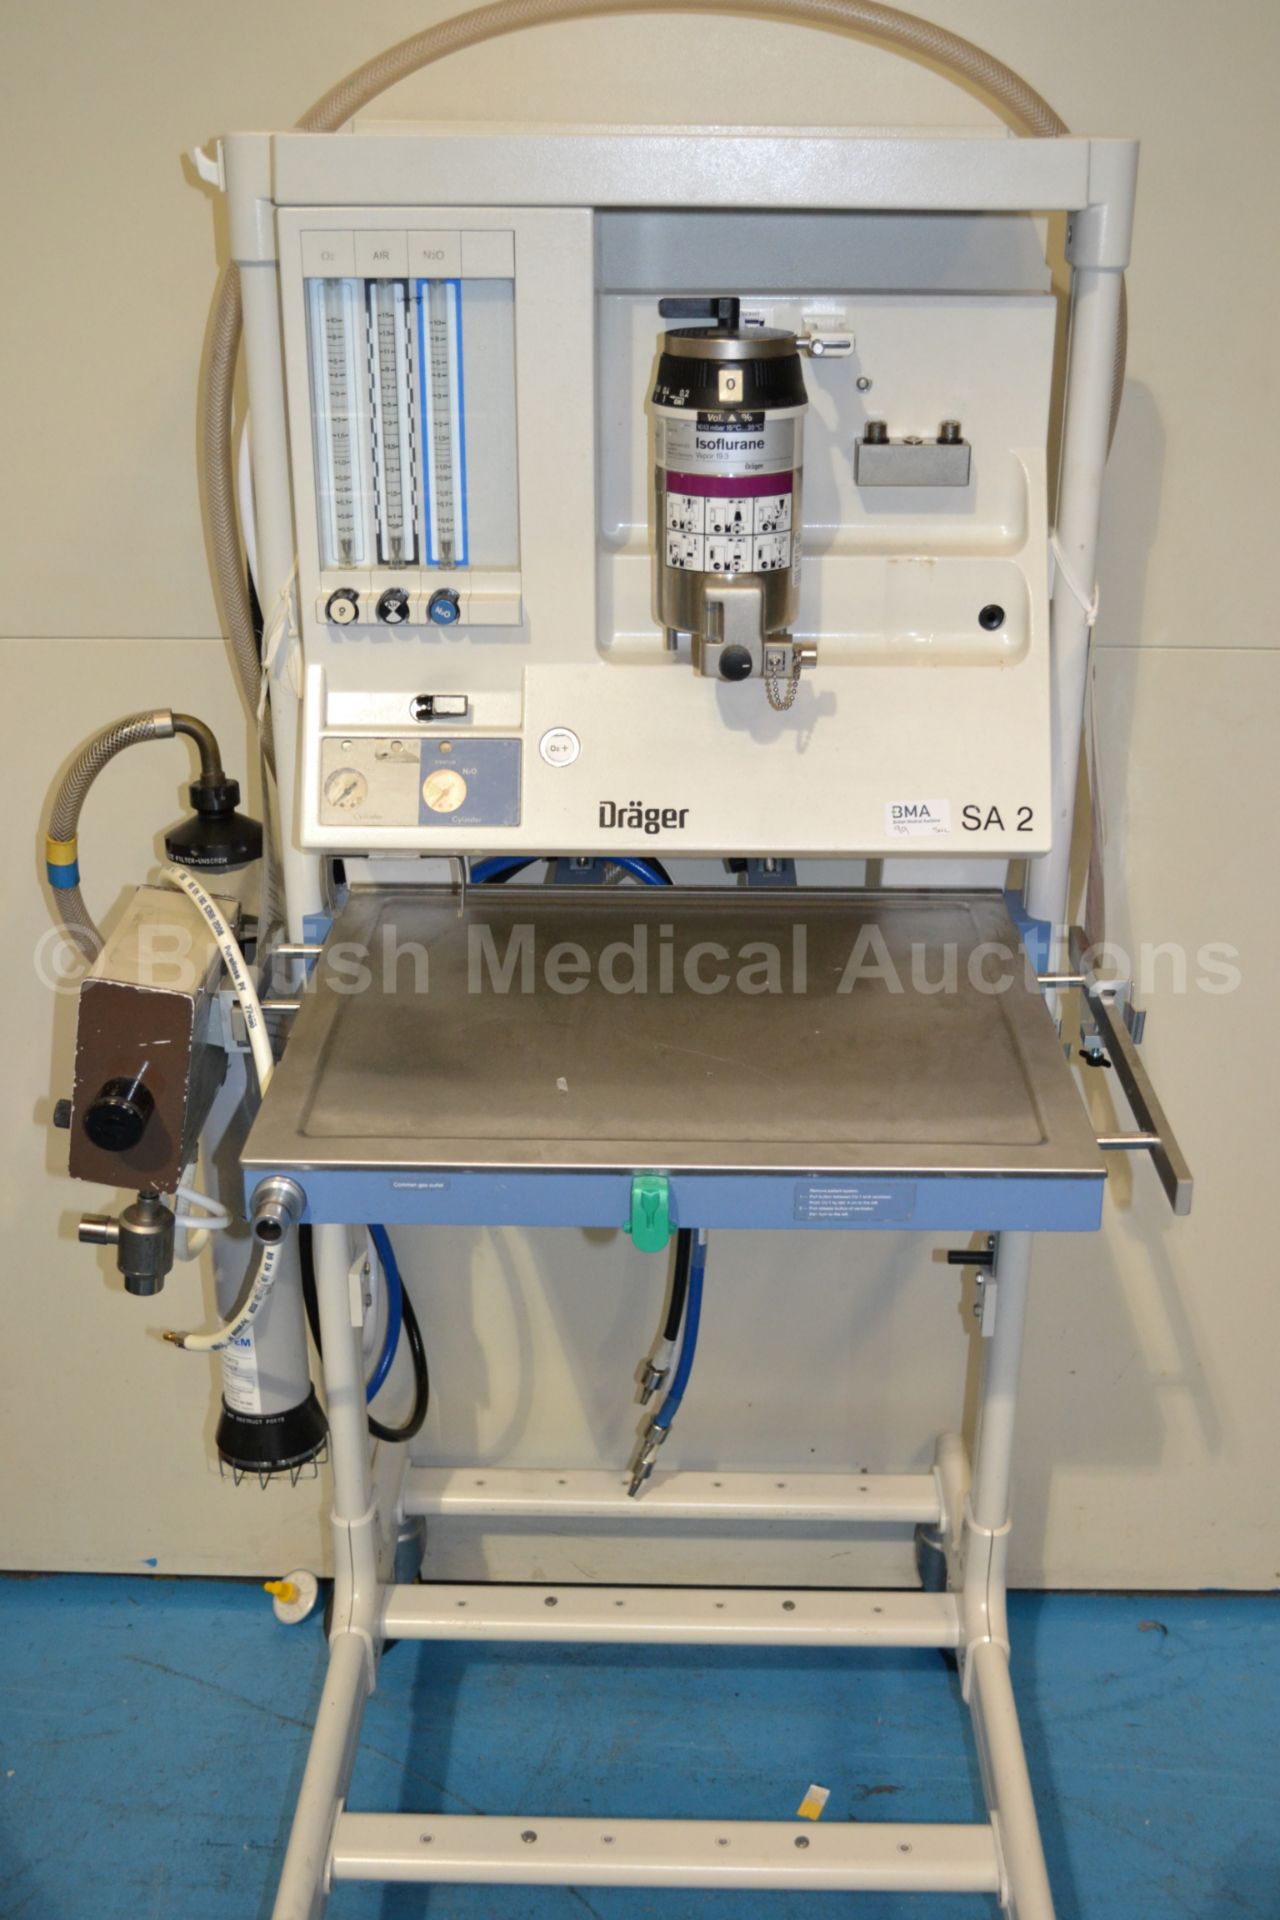 Drager SA 2 Anaesthesia System with Penlon Nuffiel